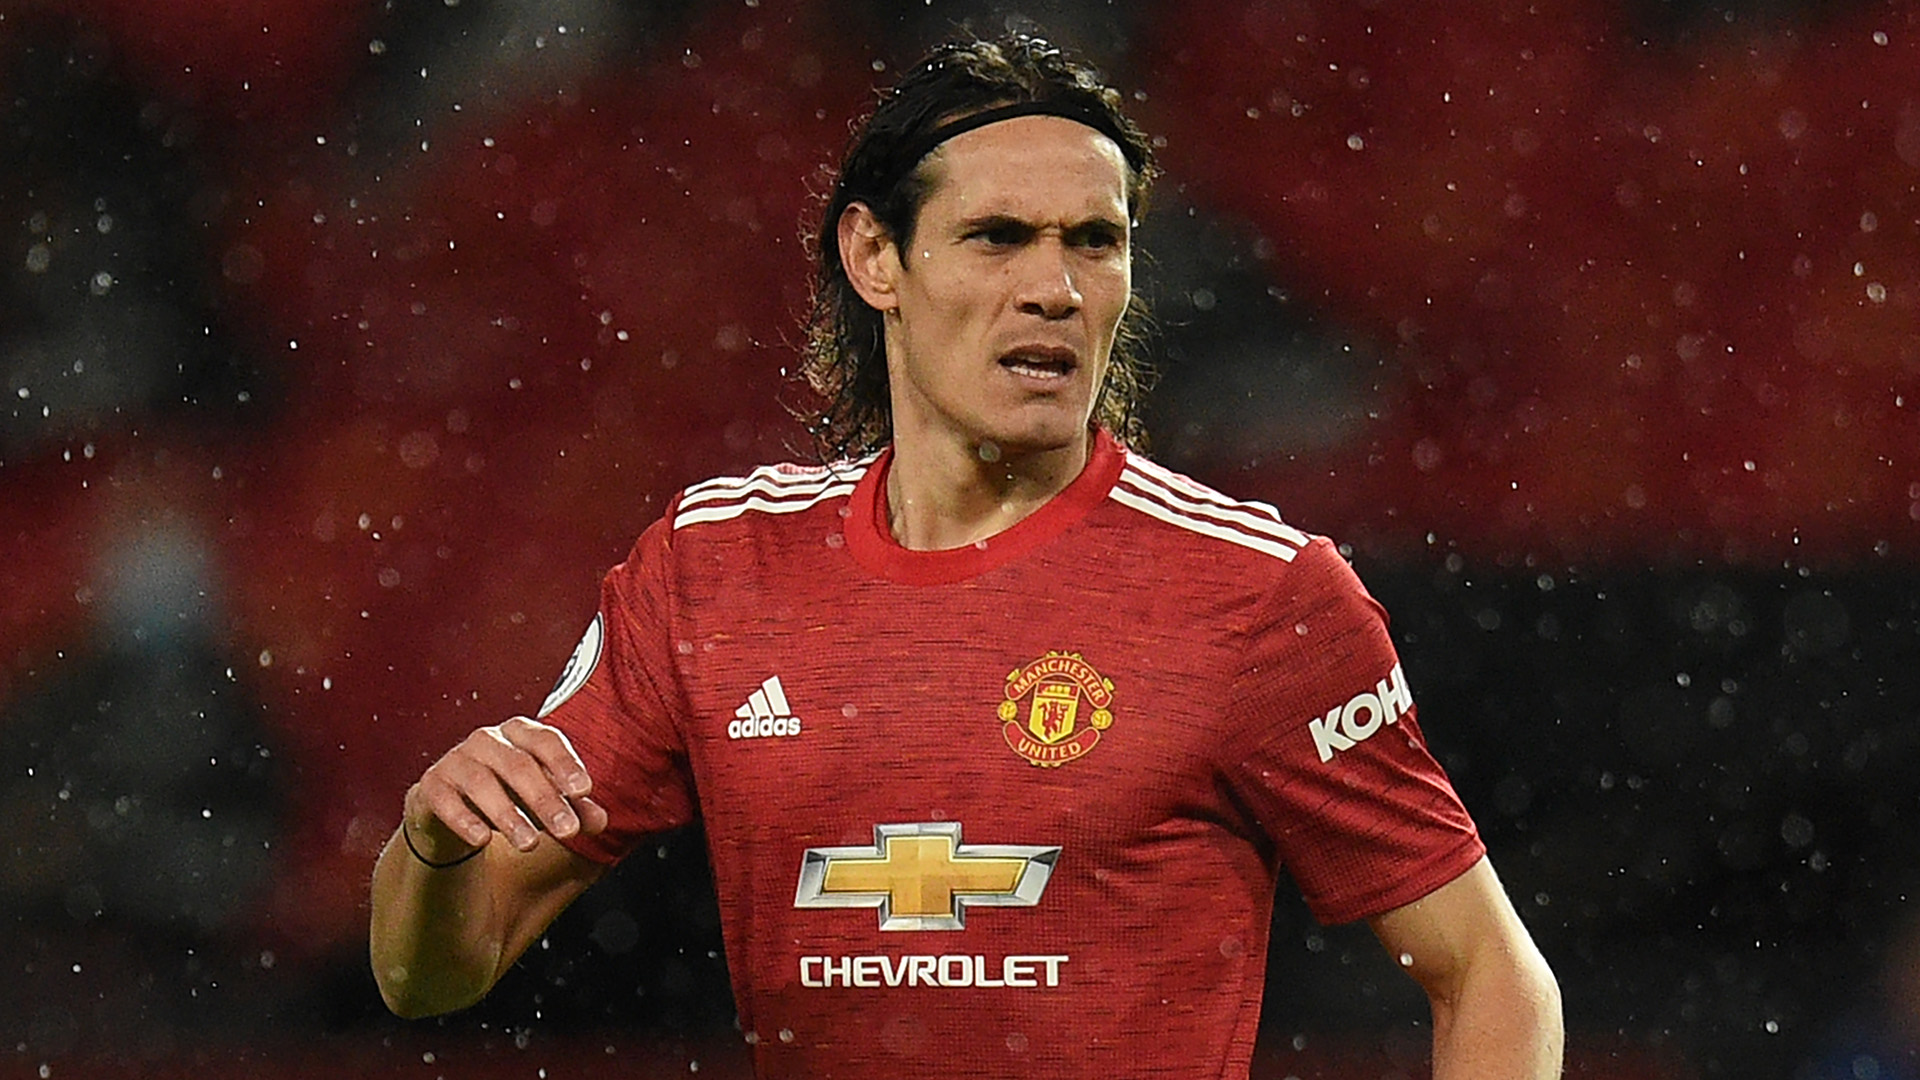 'We have to fight' - Cavani sends message to Man Utd team-mates ahead of Fulham test